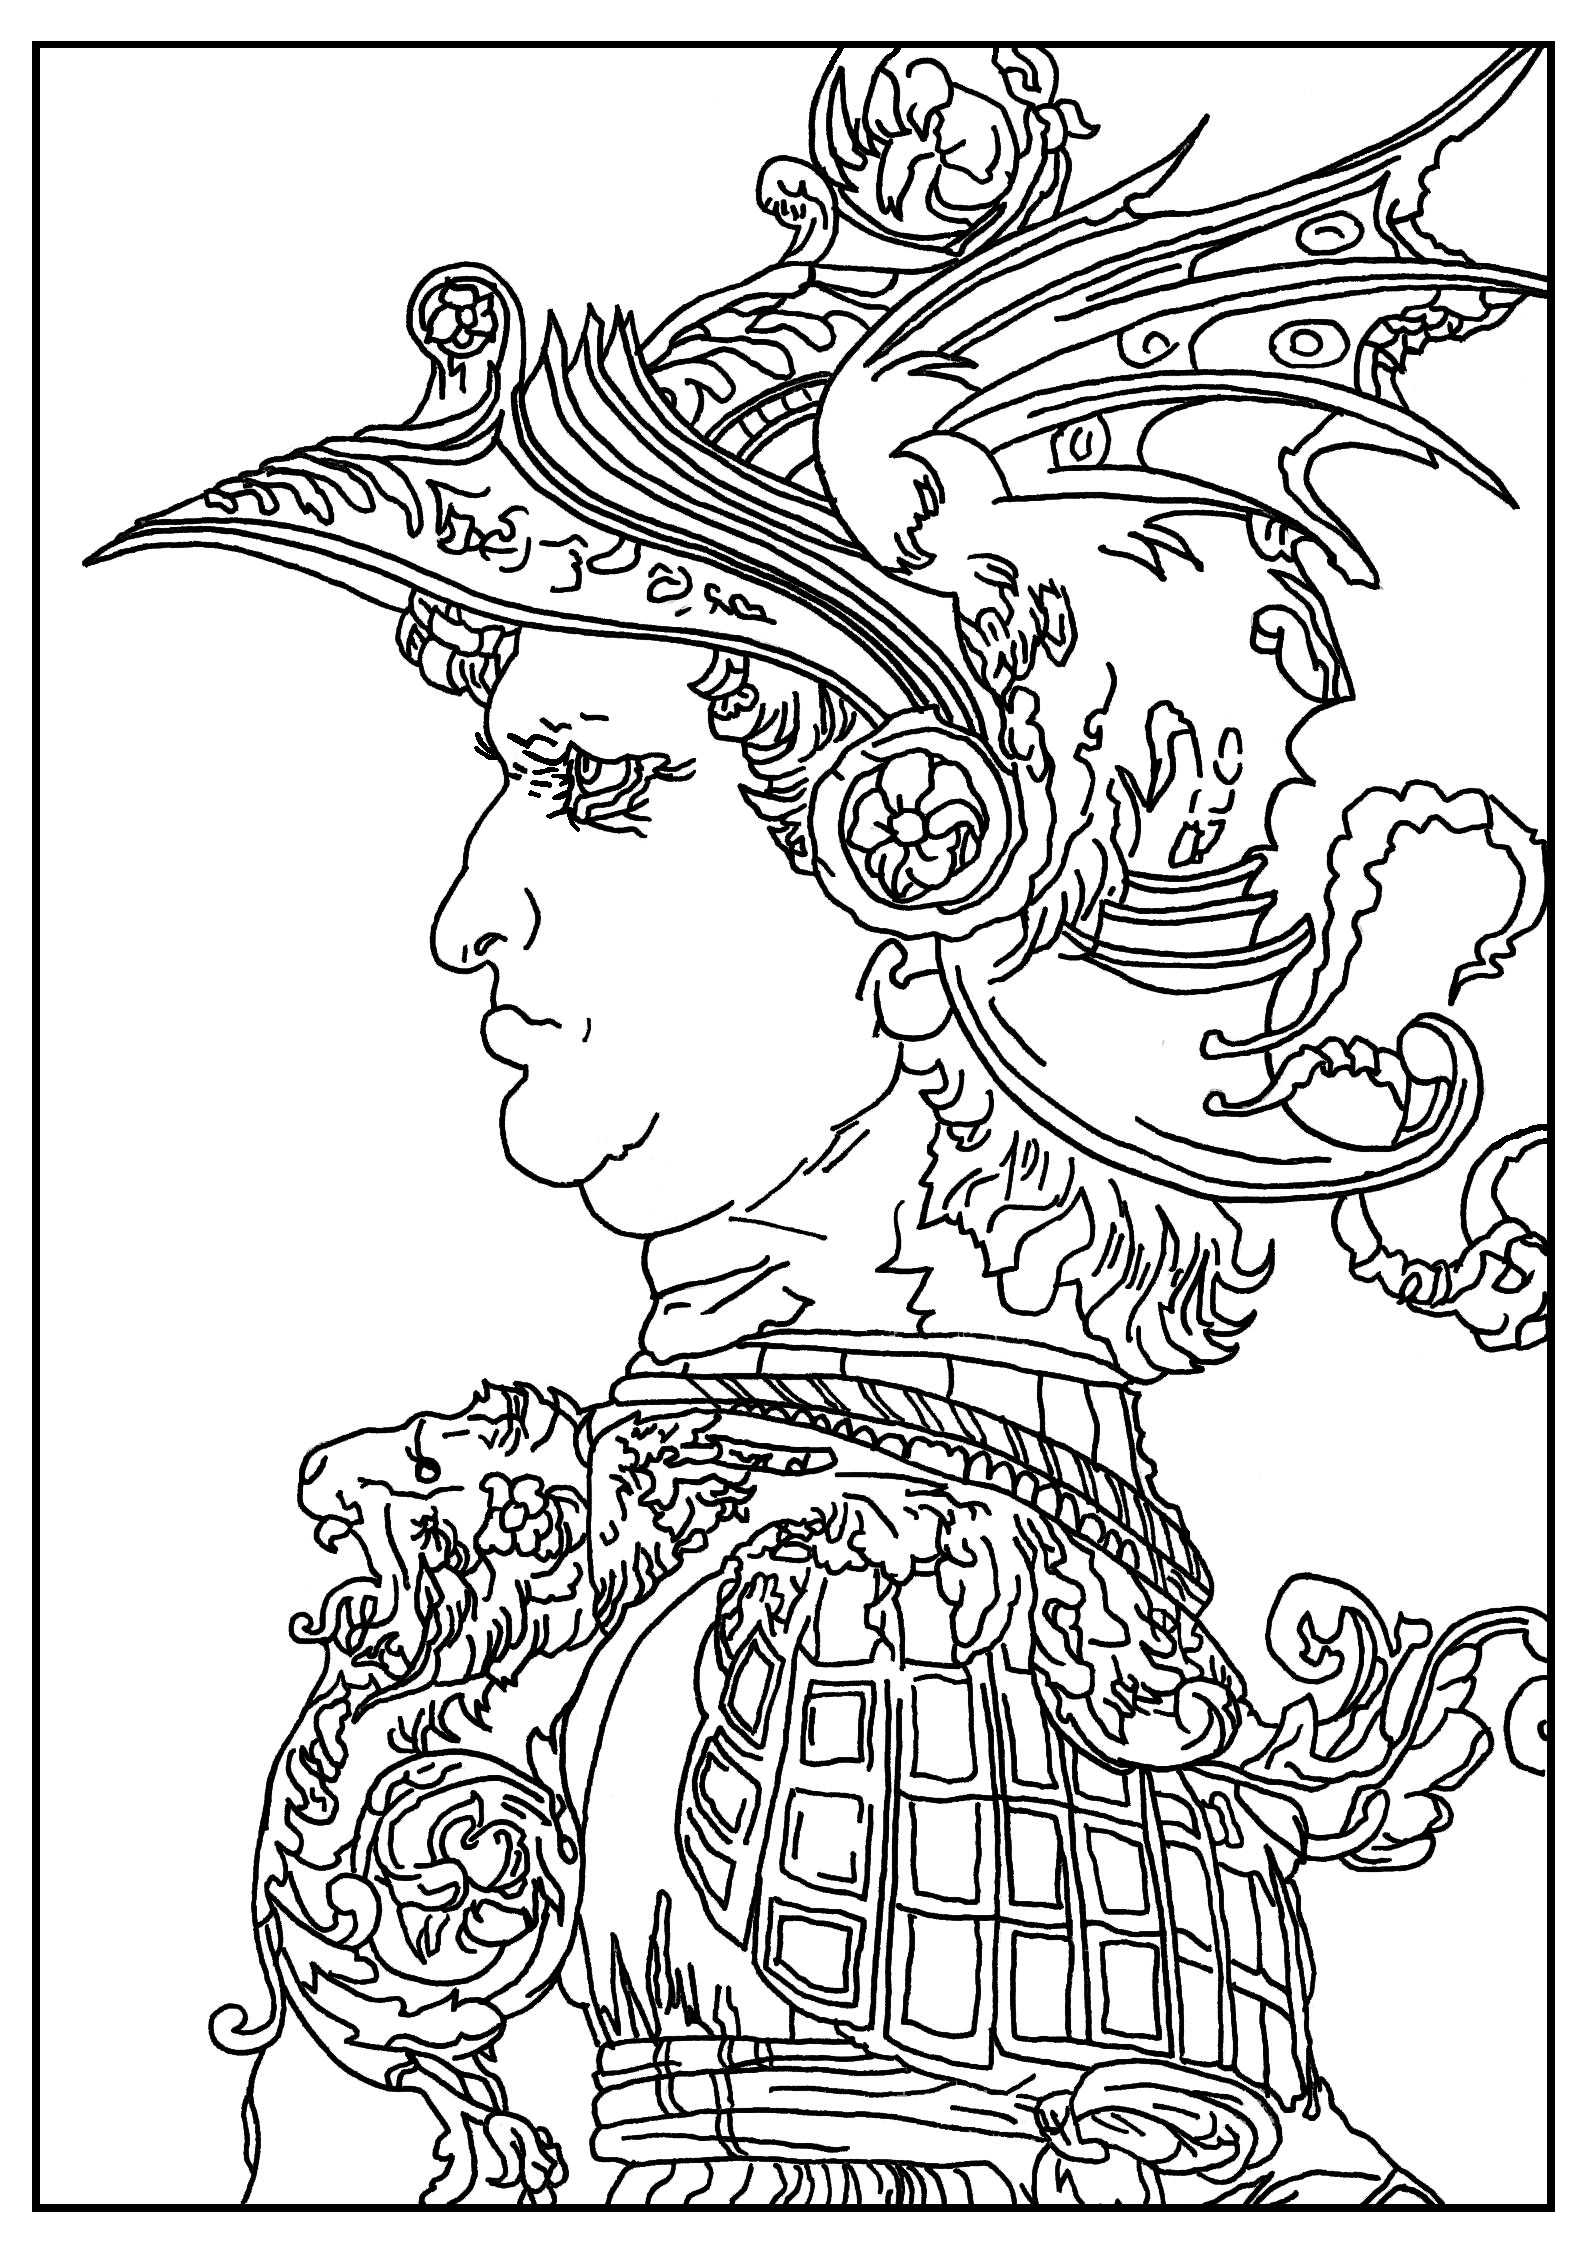 Adult coloring page inspired by a drawing by Leonardo da Vinci dating from 1477: Bust of a warrior